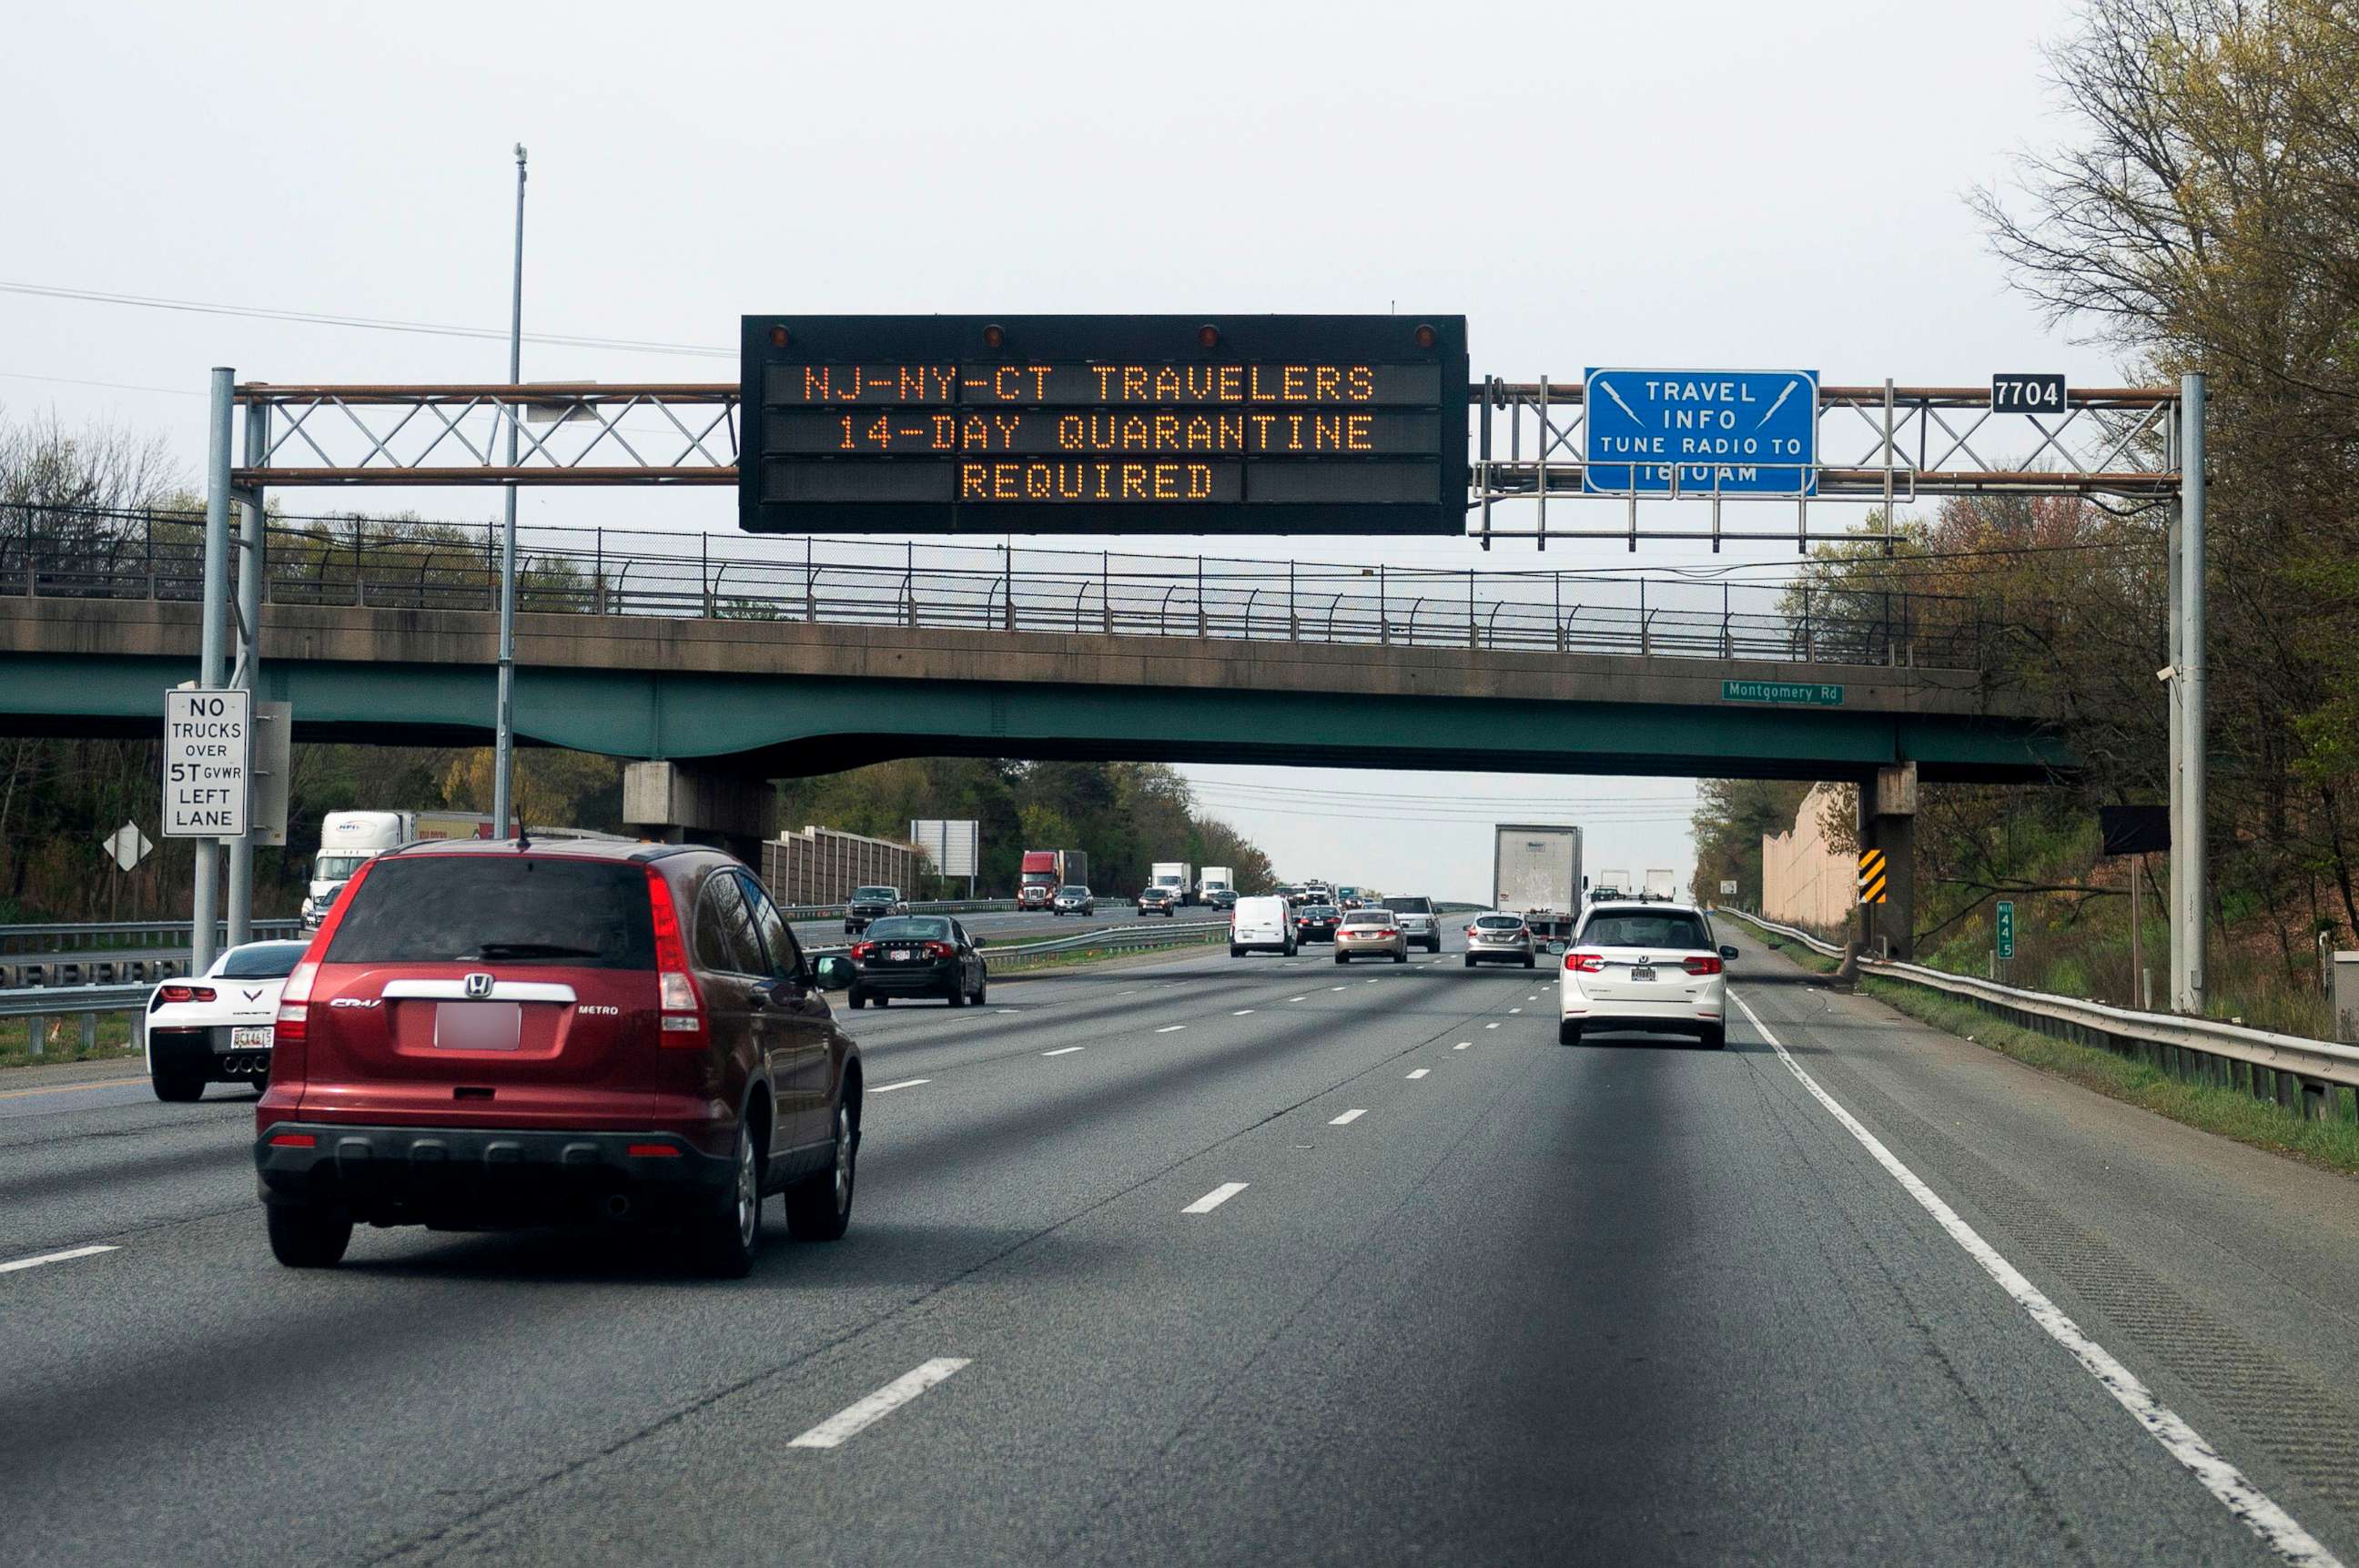 PHOTO: Cars drive below a sign on the highway notifying travelers from New York, New Jersey or Connecticut that they are required to quarantine for 14 days, in Millersville, Maryland, April 17, 2020.